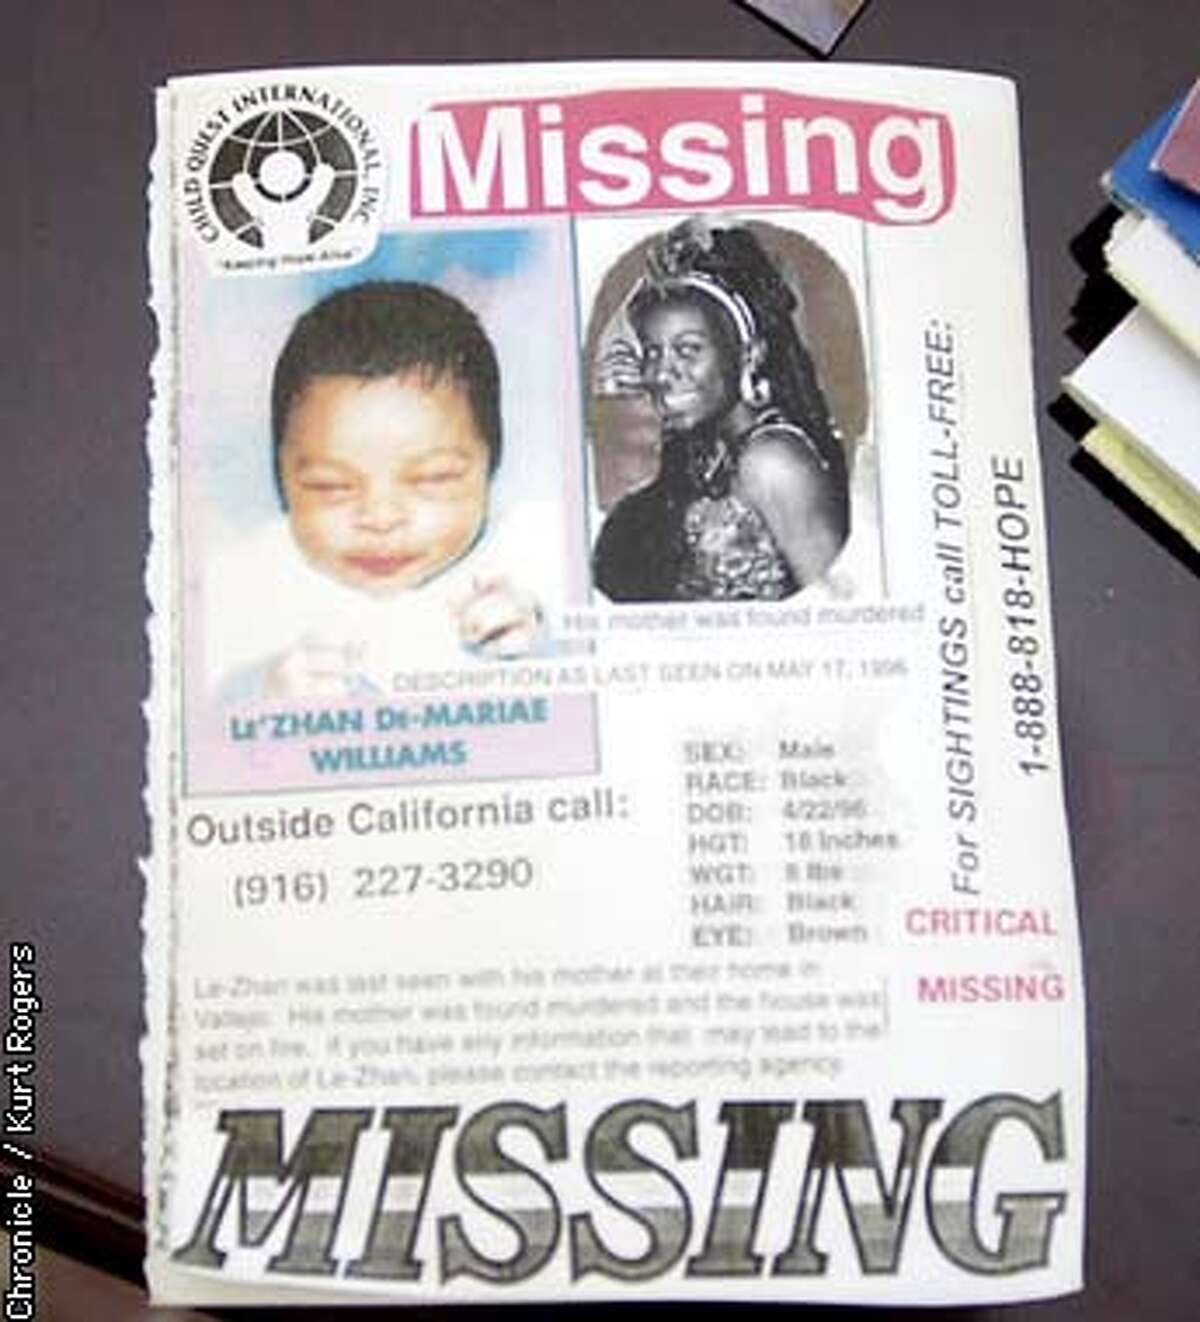 the Flyer of Le Zhan williams . The family of Daphne Boyden 17 when she was murdered and her two week old son Le-Zhan Williams was kidnapped. Celebrated the fact that Le-Zhan was found . Photo By Kurt Rogers